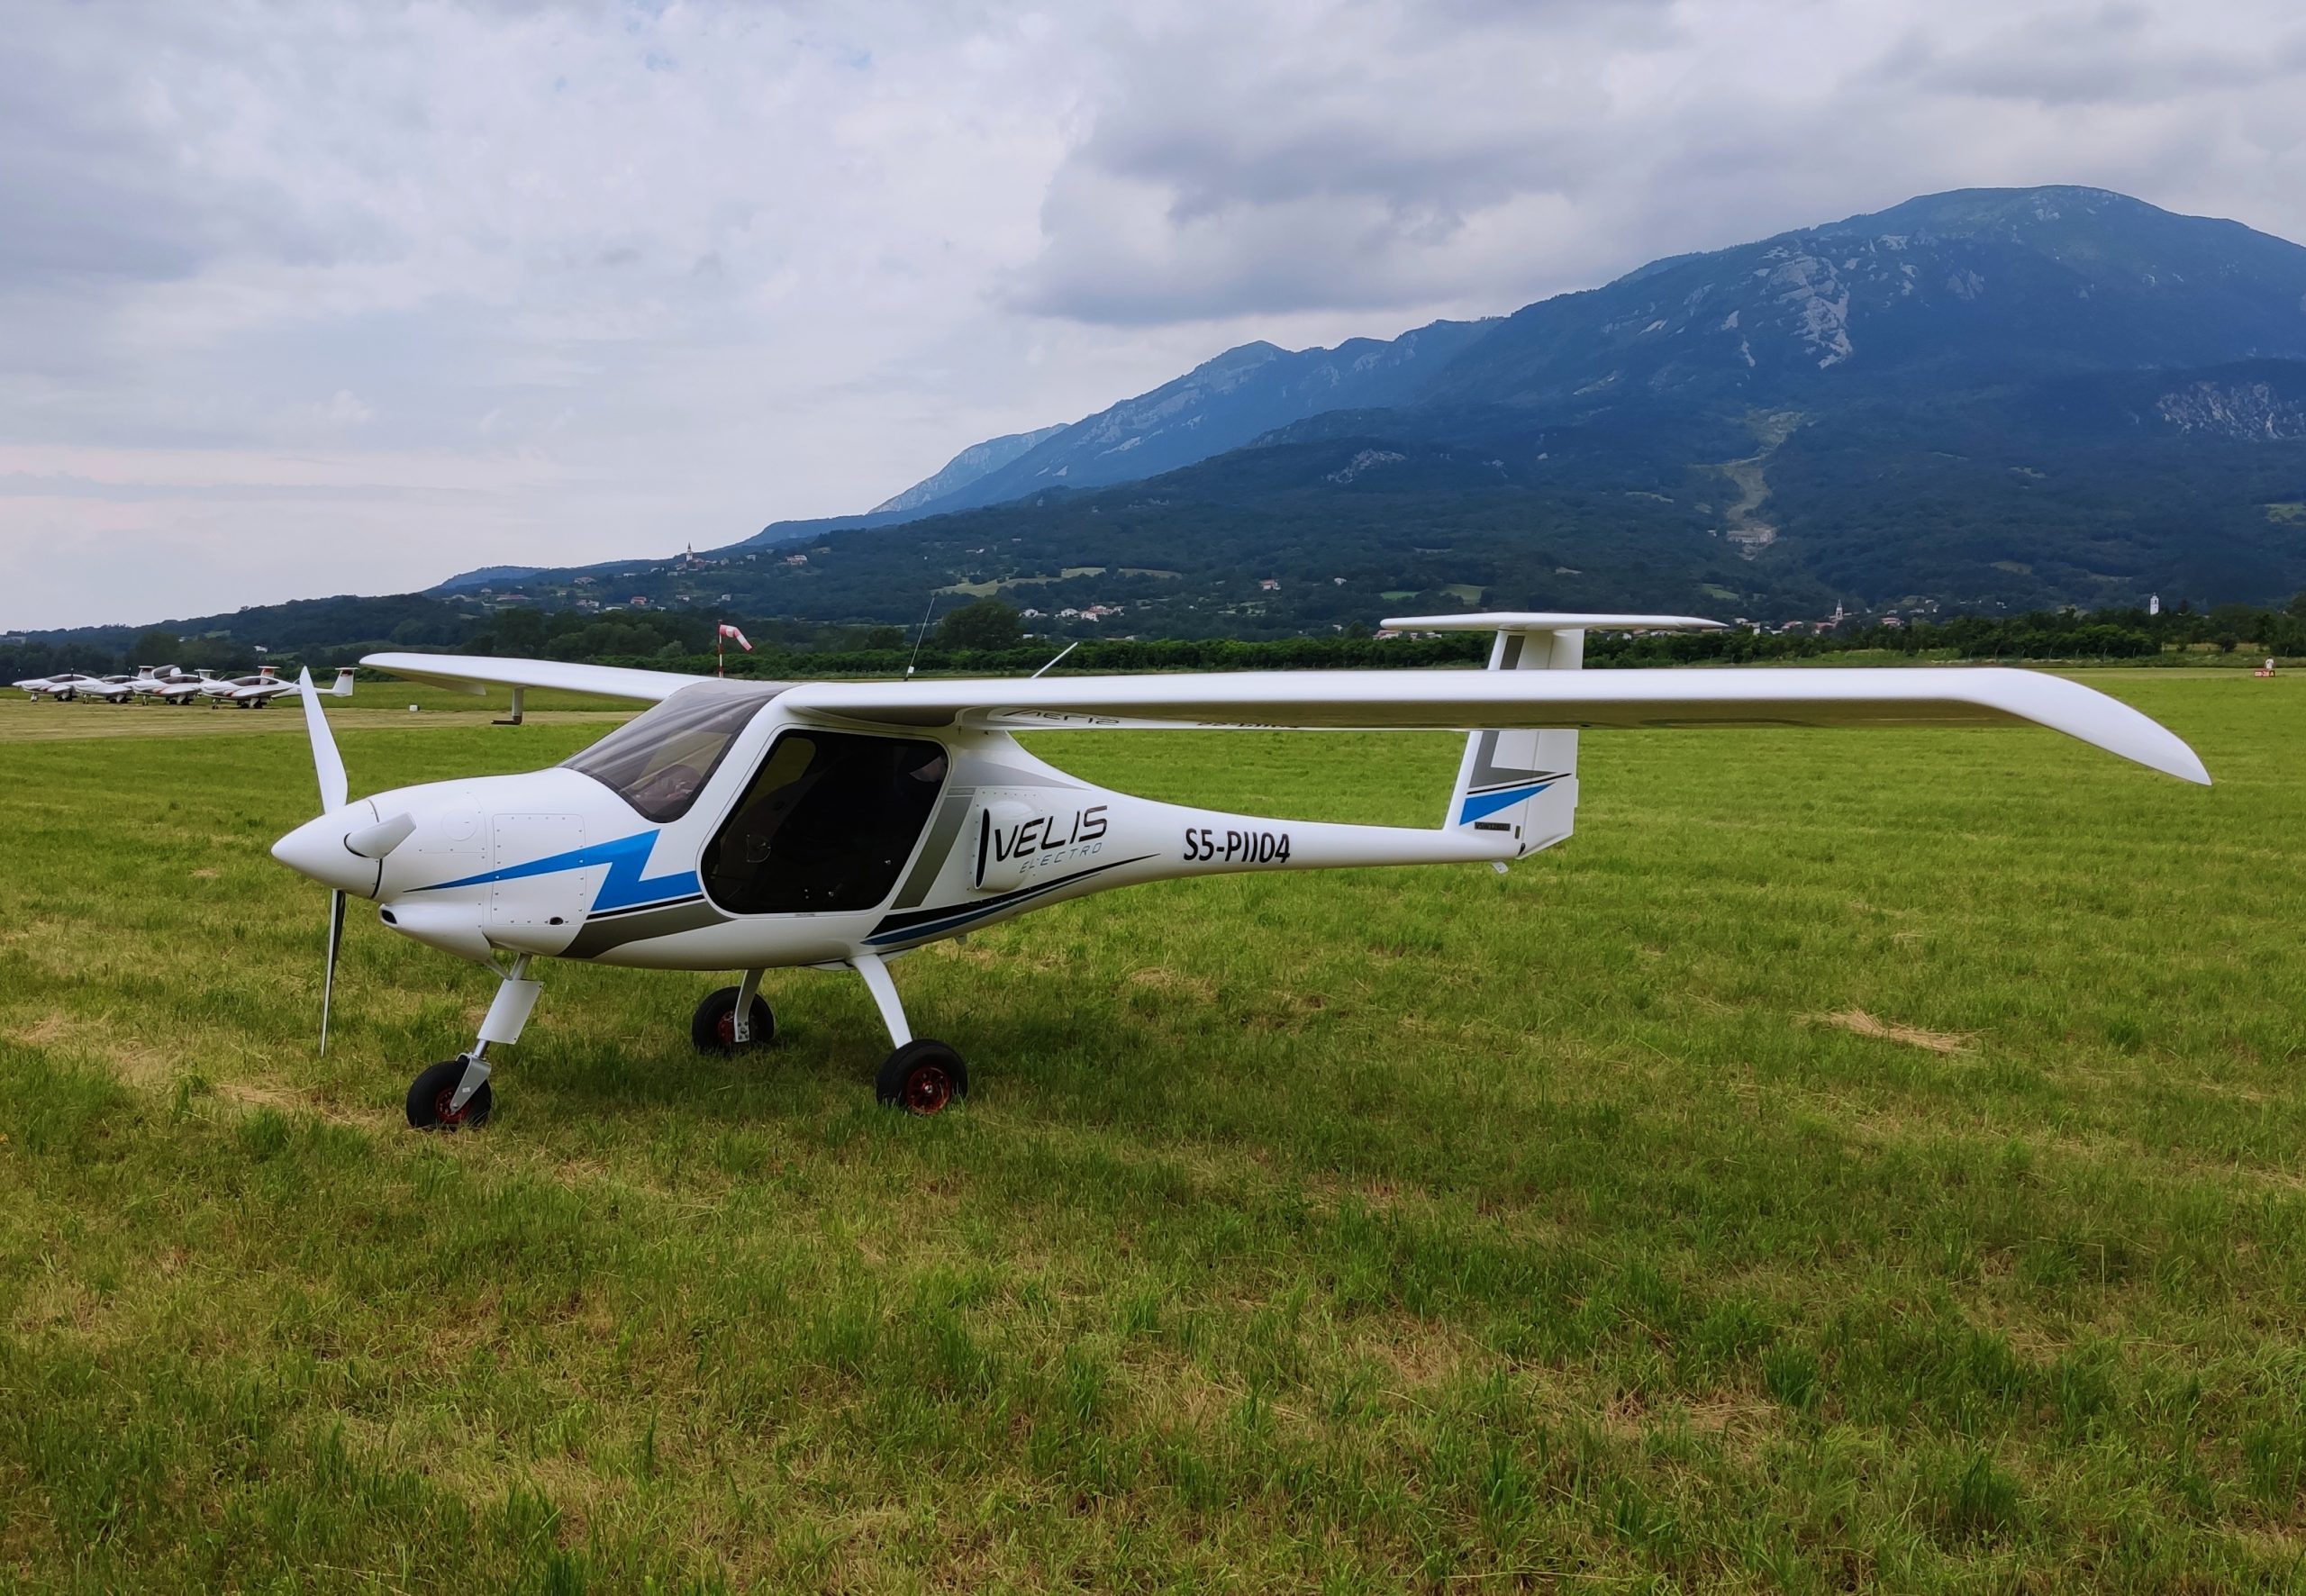 A small white, blue, and gray airplane in a field with a mountain in the background.